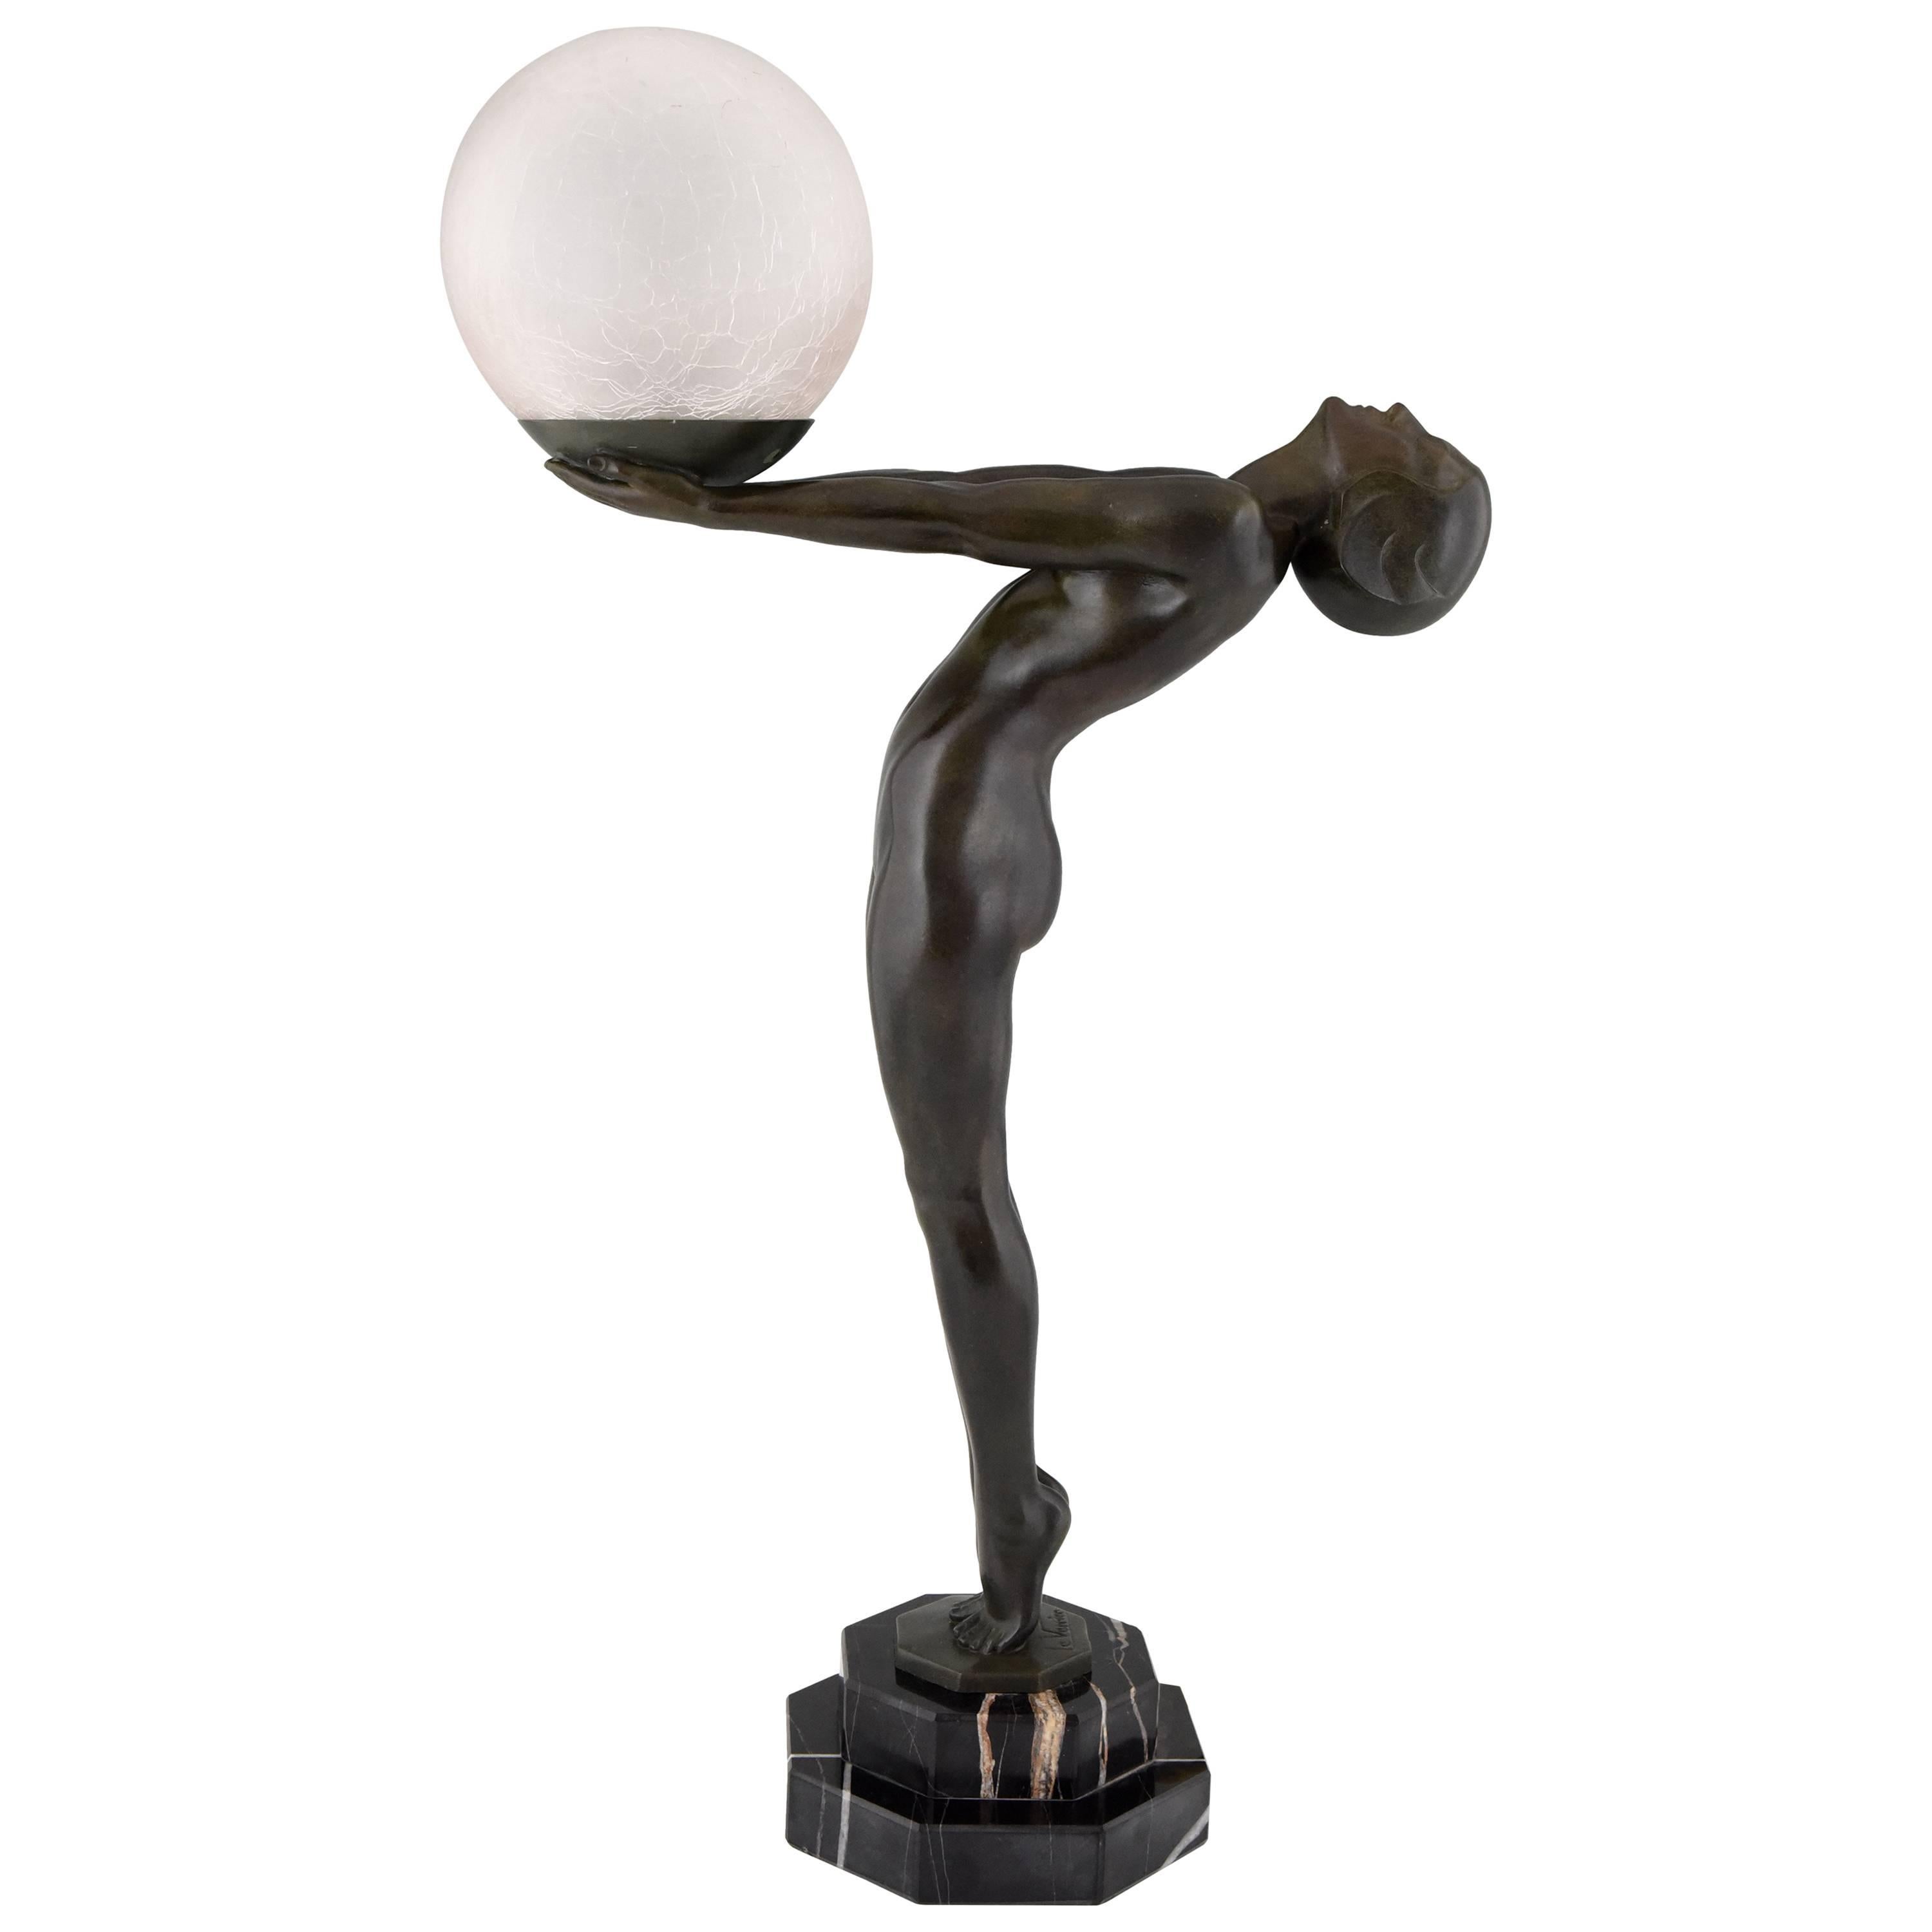 French Art Deco Lamp, Nude with Ball by Max Le Verrier, 1930